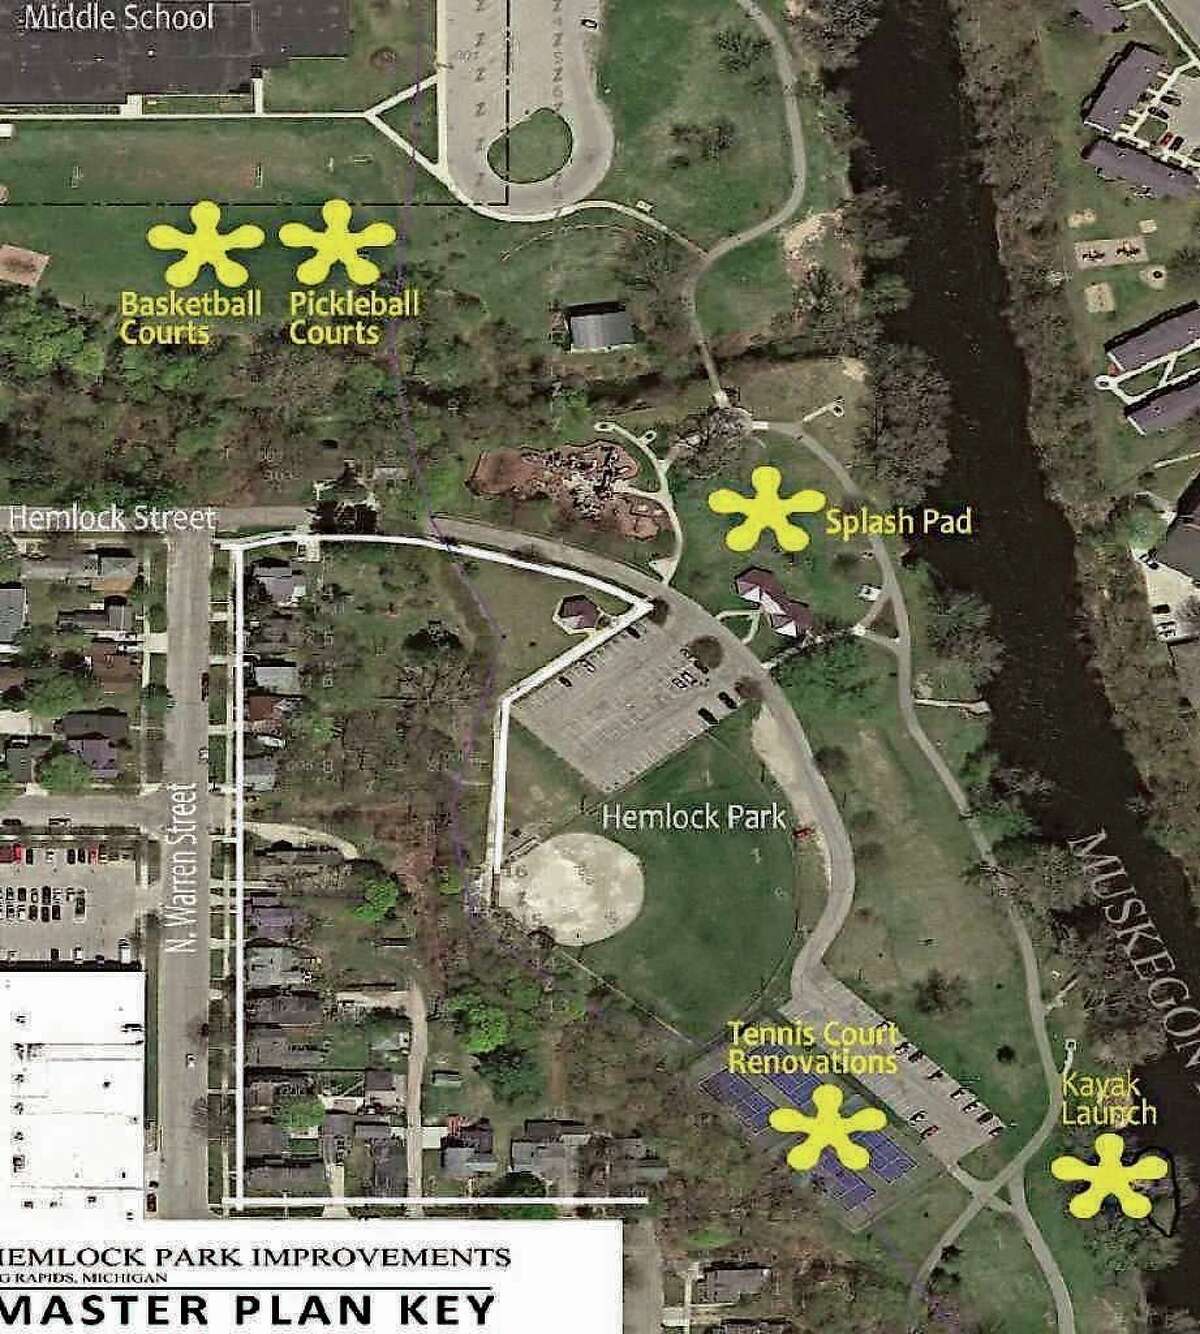 Hemlock Park improvements to begin this summer include the pickleball and basketball courts as well as sewer and water infrastructure in anticipation of the installation of the Splash Pad next year. 